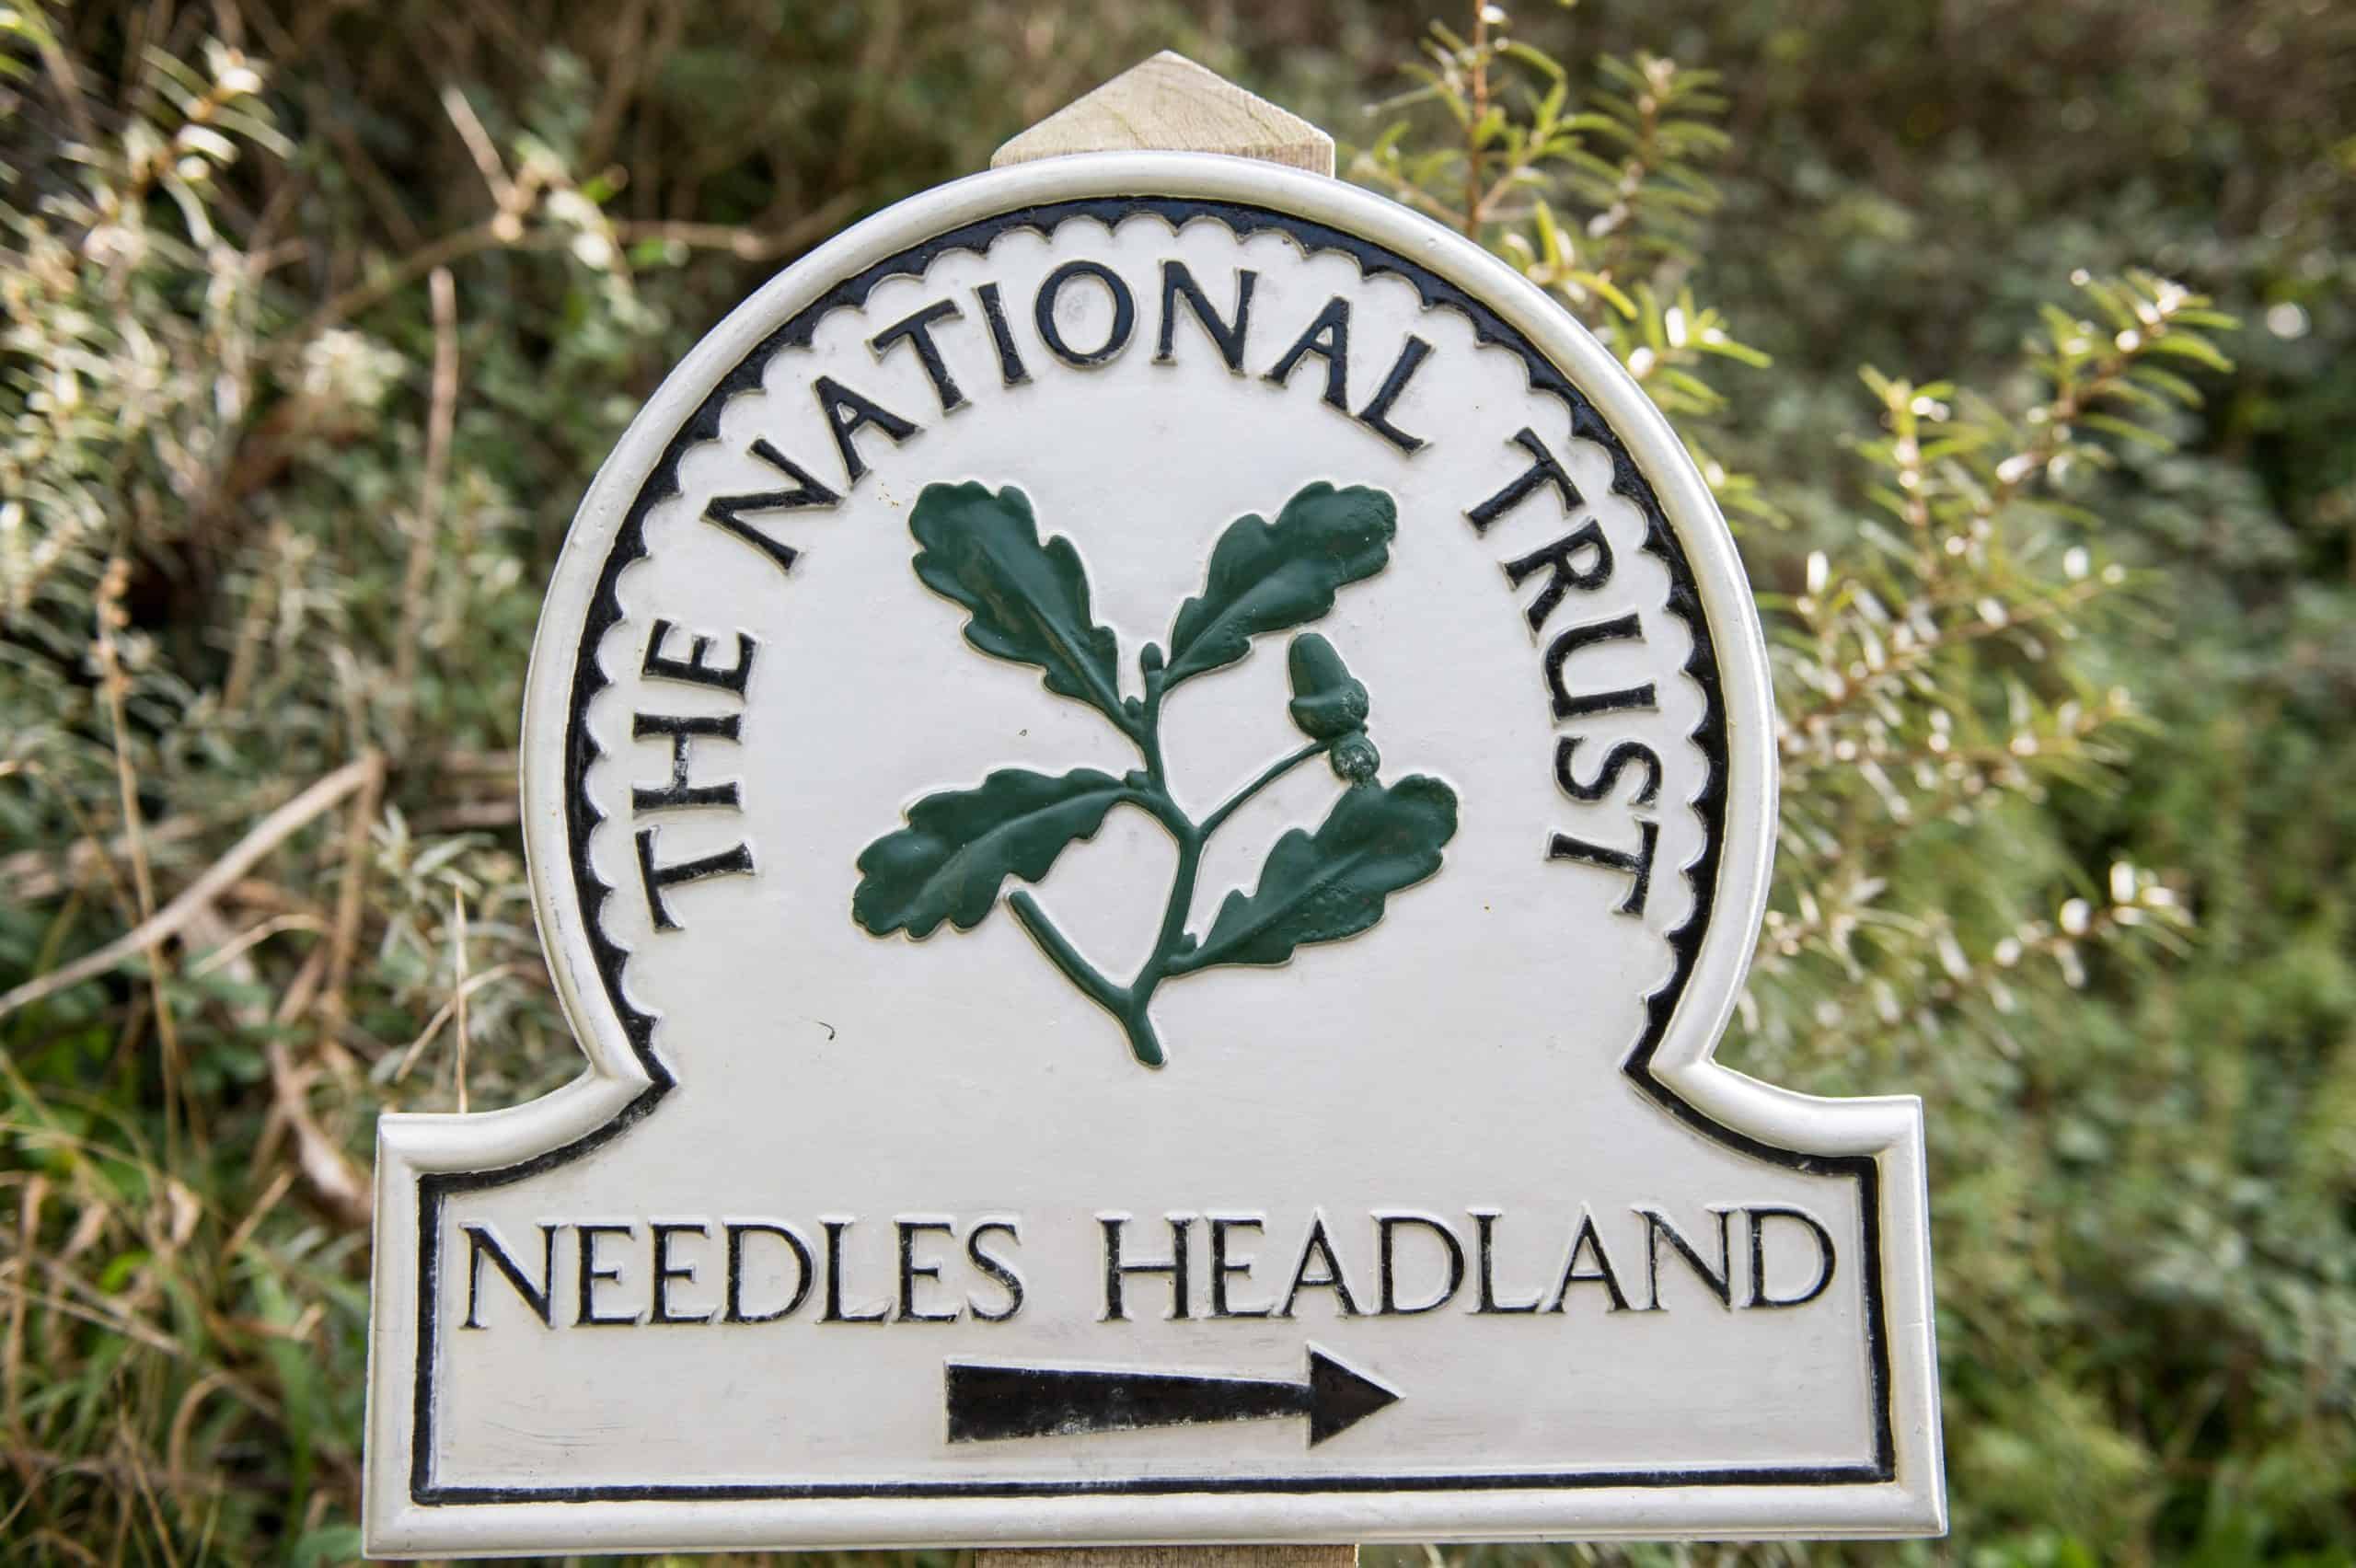 National Trust close parks from midnight due to coronavirus outbreak